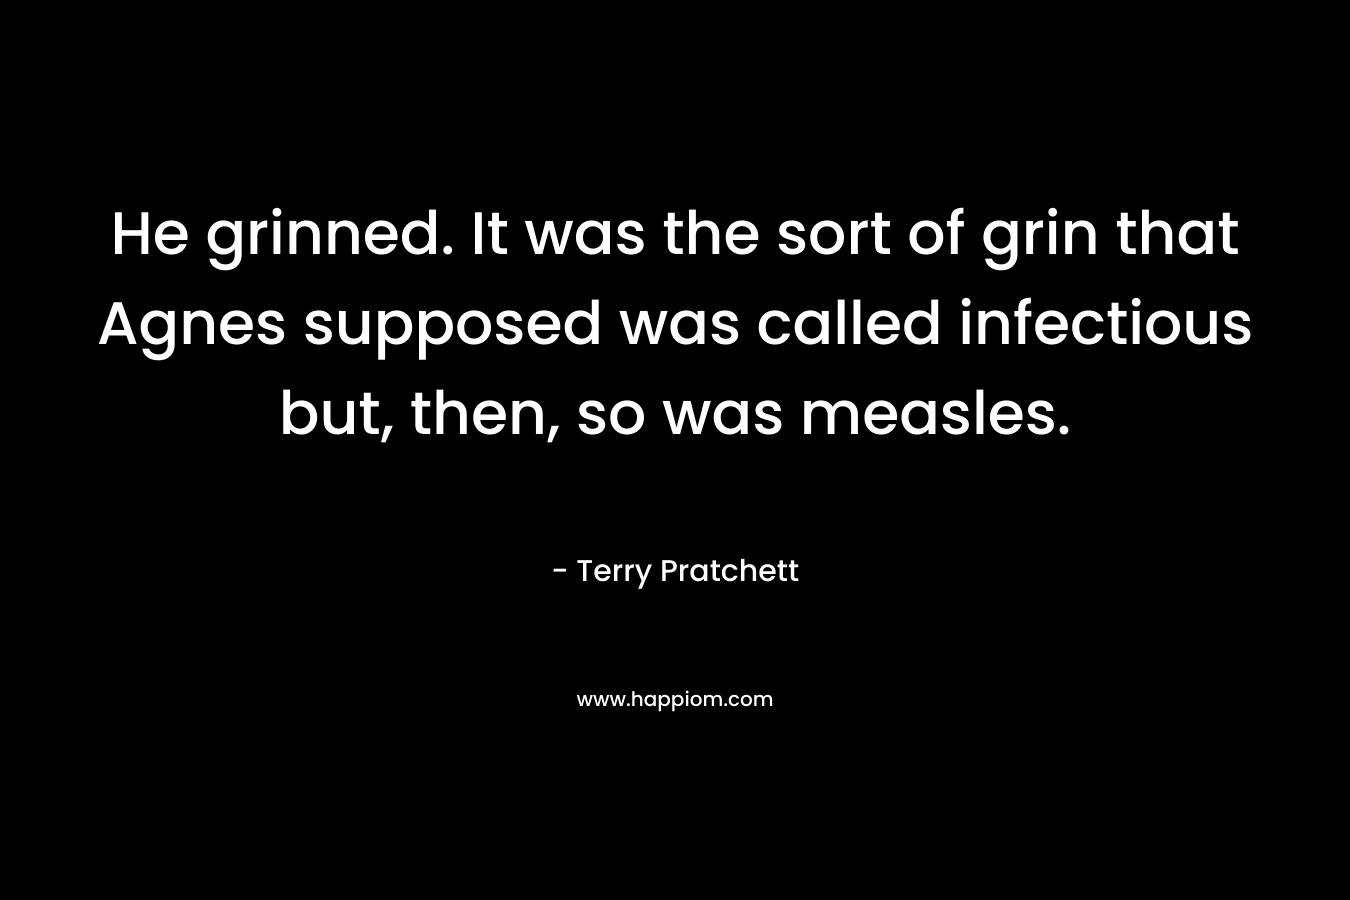 He grinned. It was the sort of grin that Agnes supposed was called infectious but, then, so was measles.